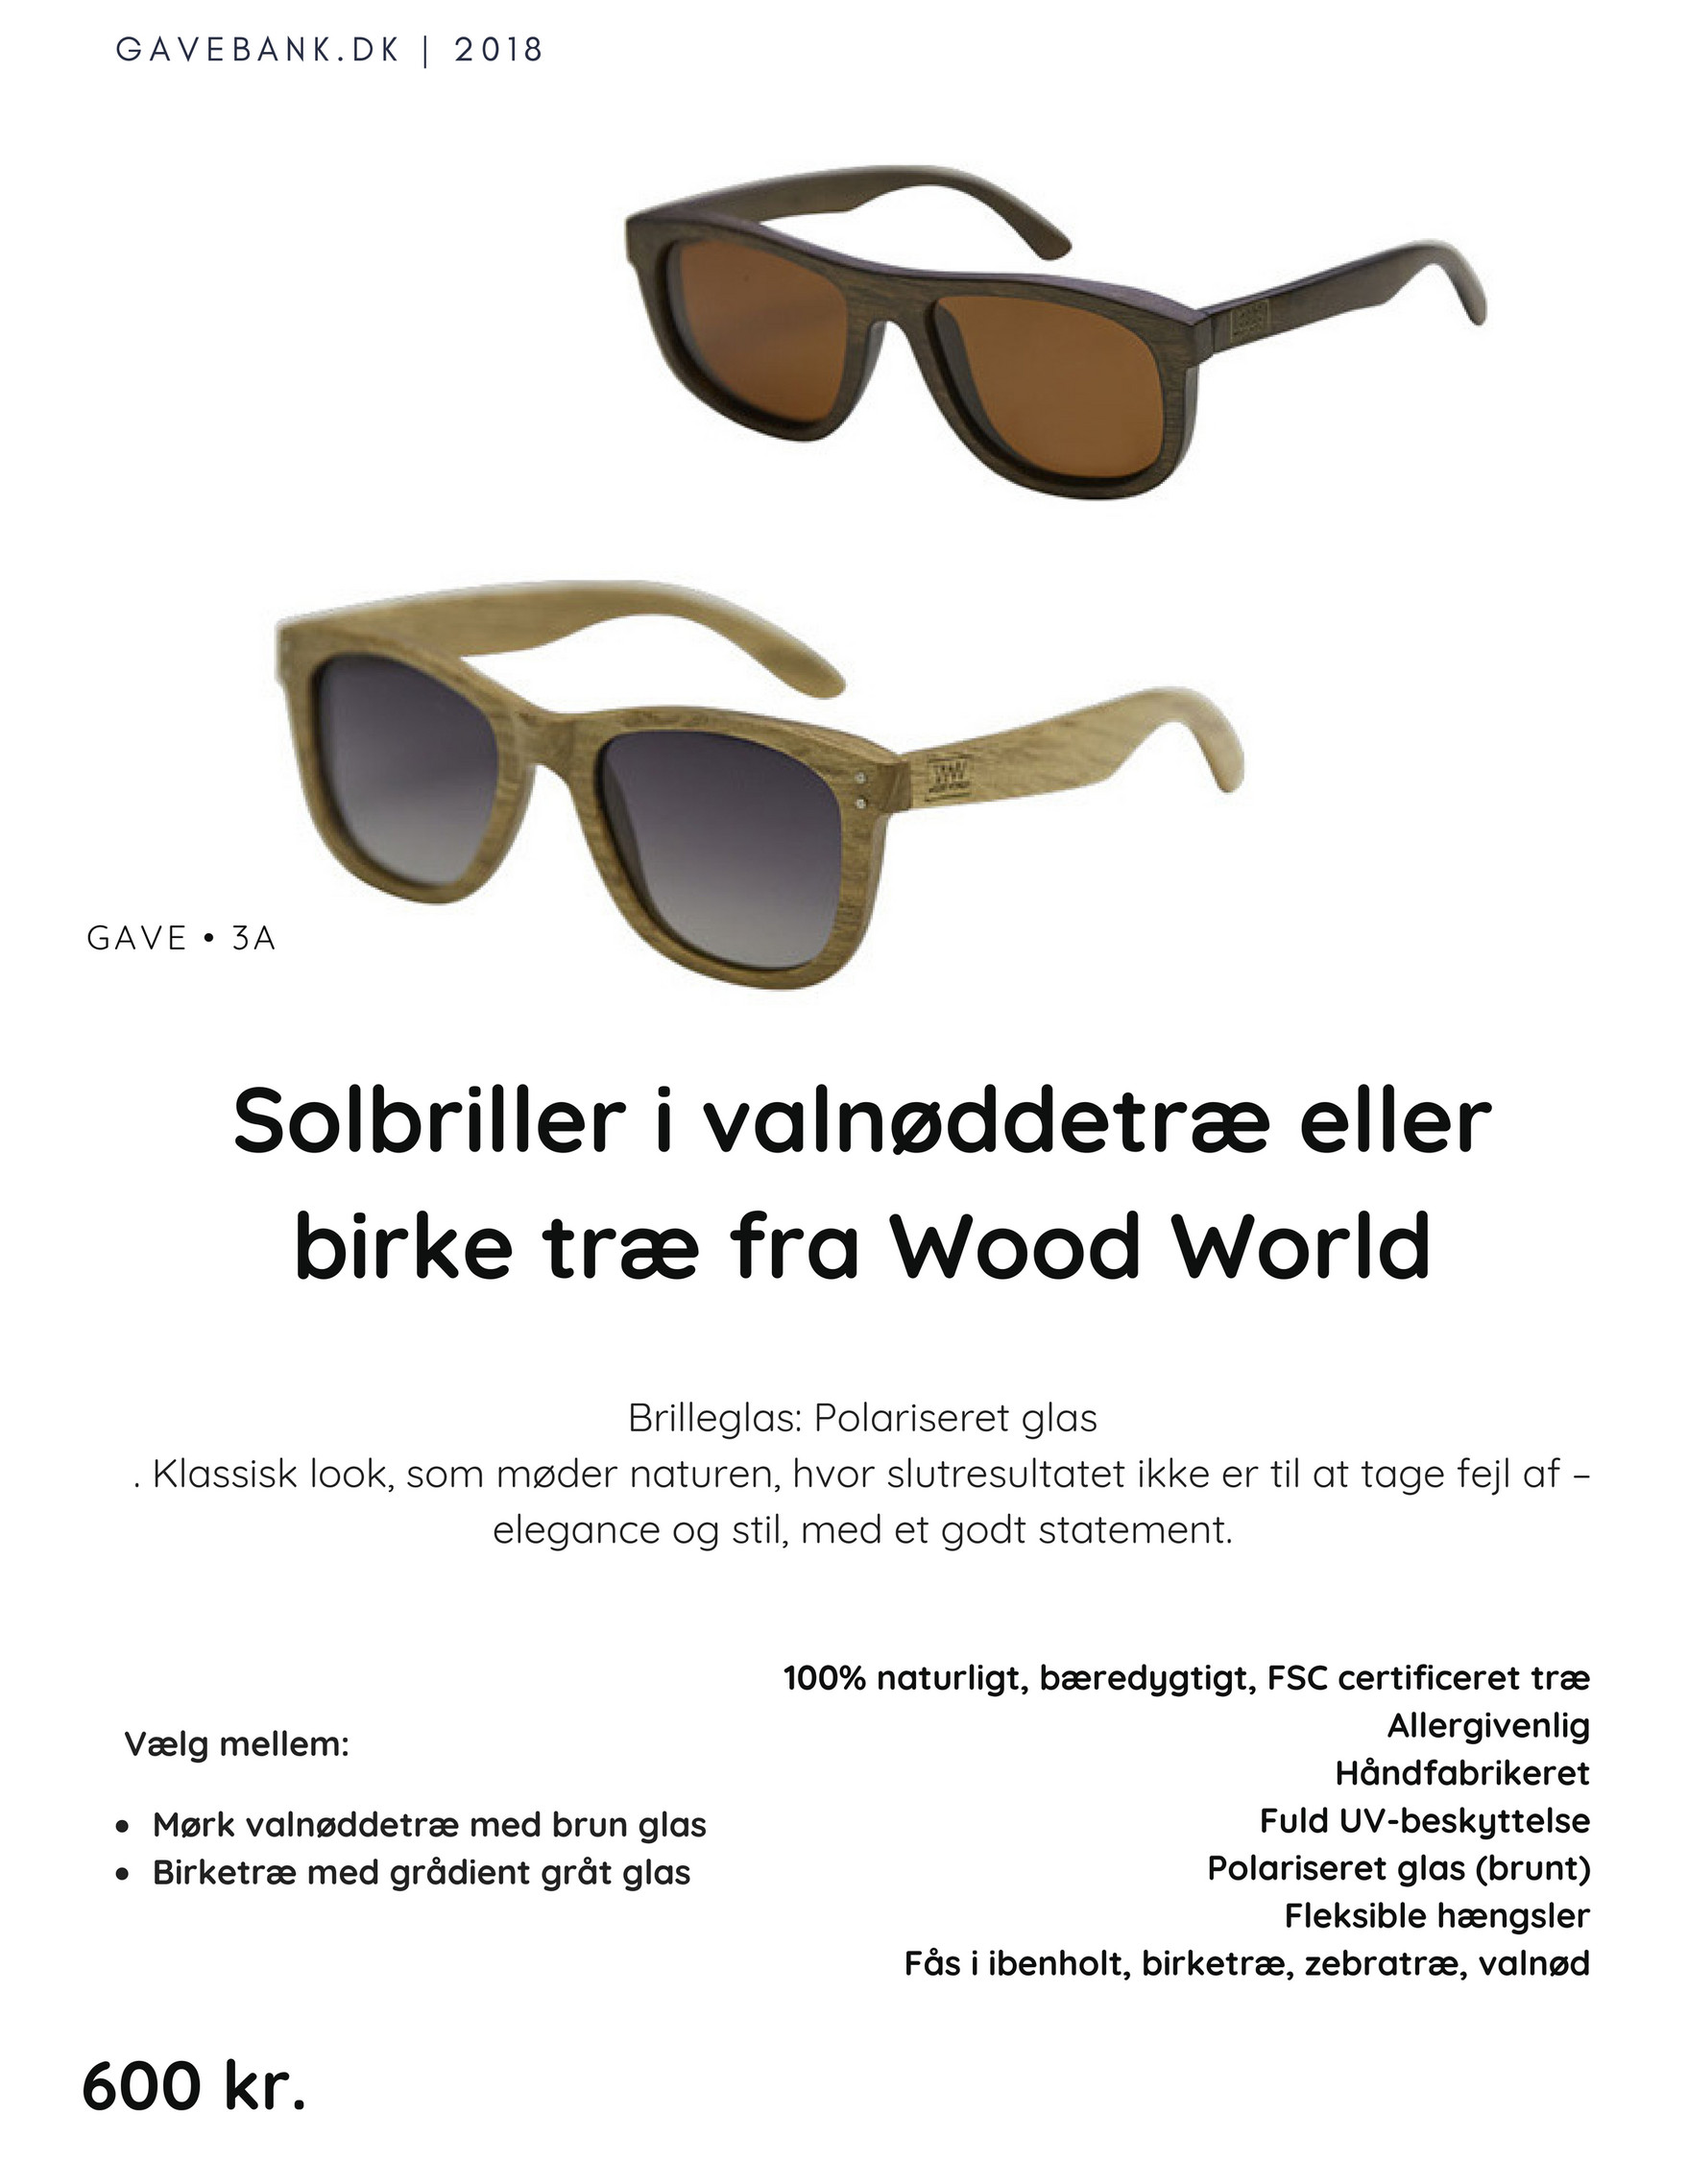 Sustainable 400kr + - Side 4-5 - with Publitas.com